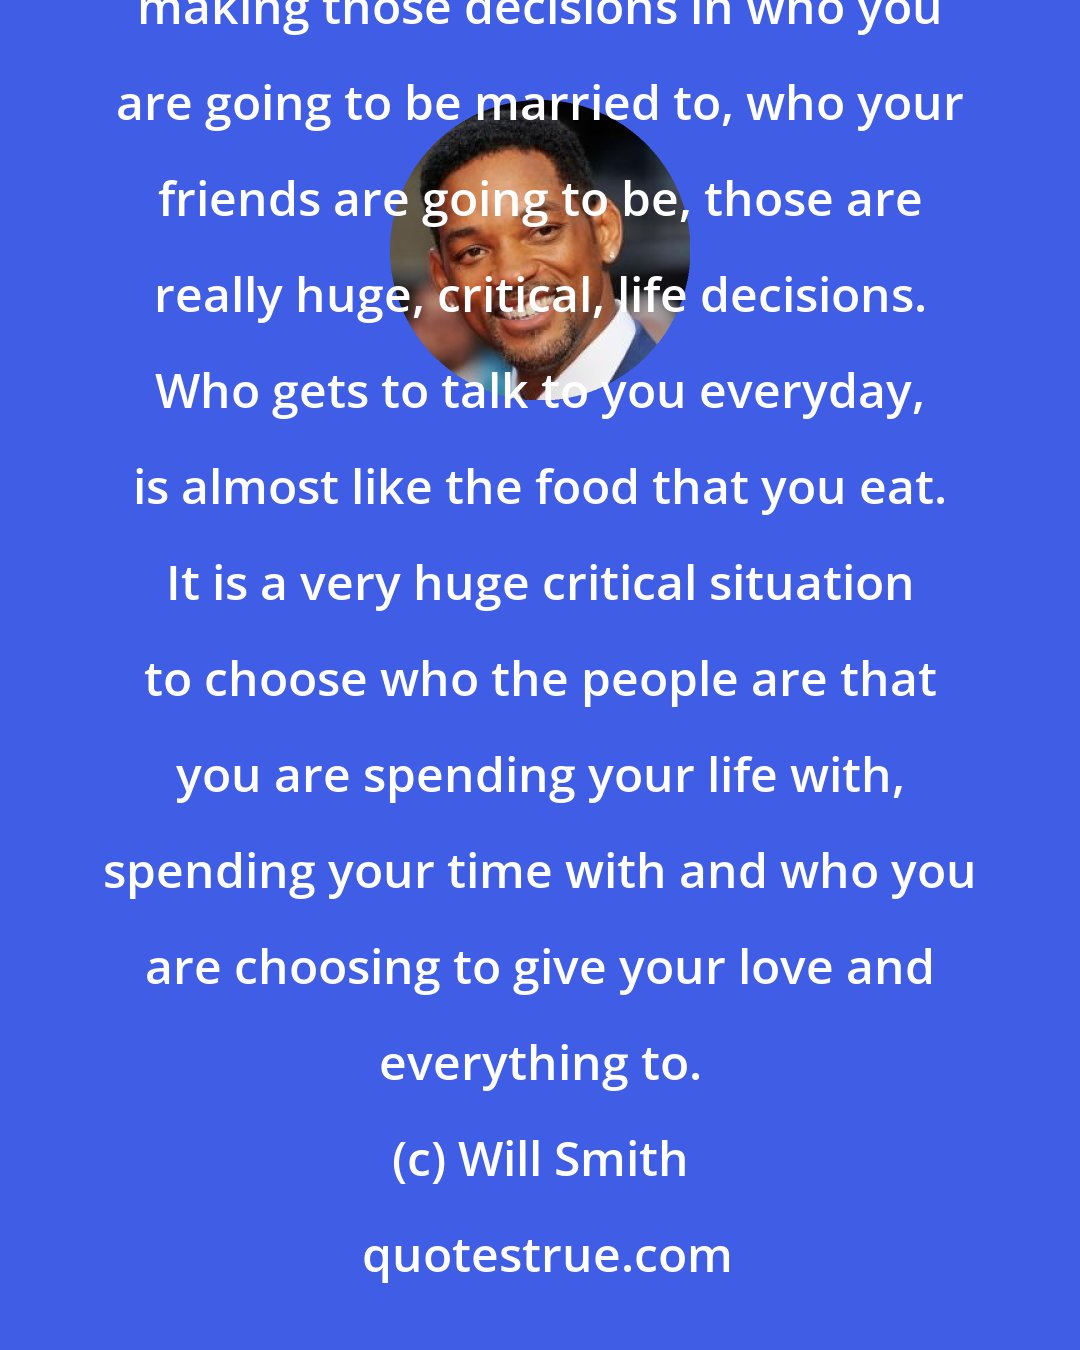 Will Smith: When you look around at the six people that you spend the most time with, that's who you are. I think that in making those decisions in who you are going to be married to, who your friends are going to be, those are really huge, critical, life decisions. Who gets to talk to you everyday, is almost like the food that you eat. It is a very huge critical situation to choose who the people are that you are spending your life with, spending your time with and who you are choosing to give your love and everything to.